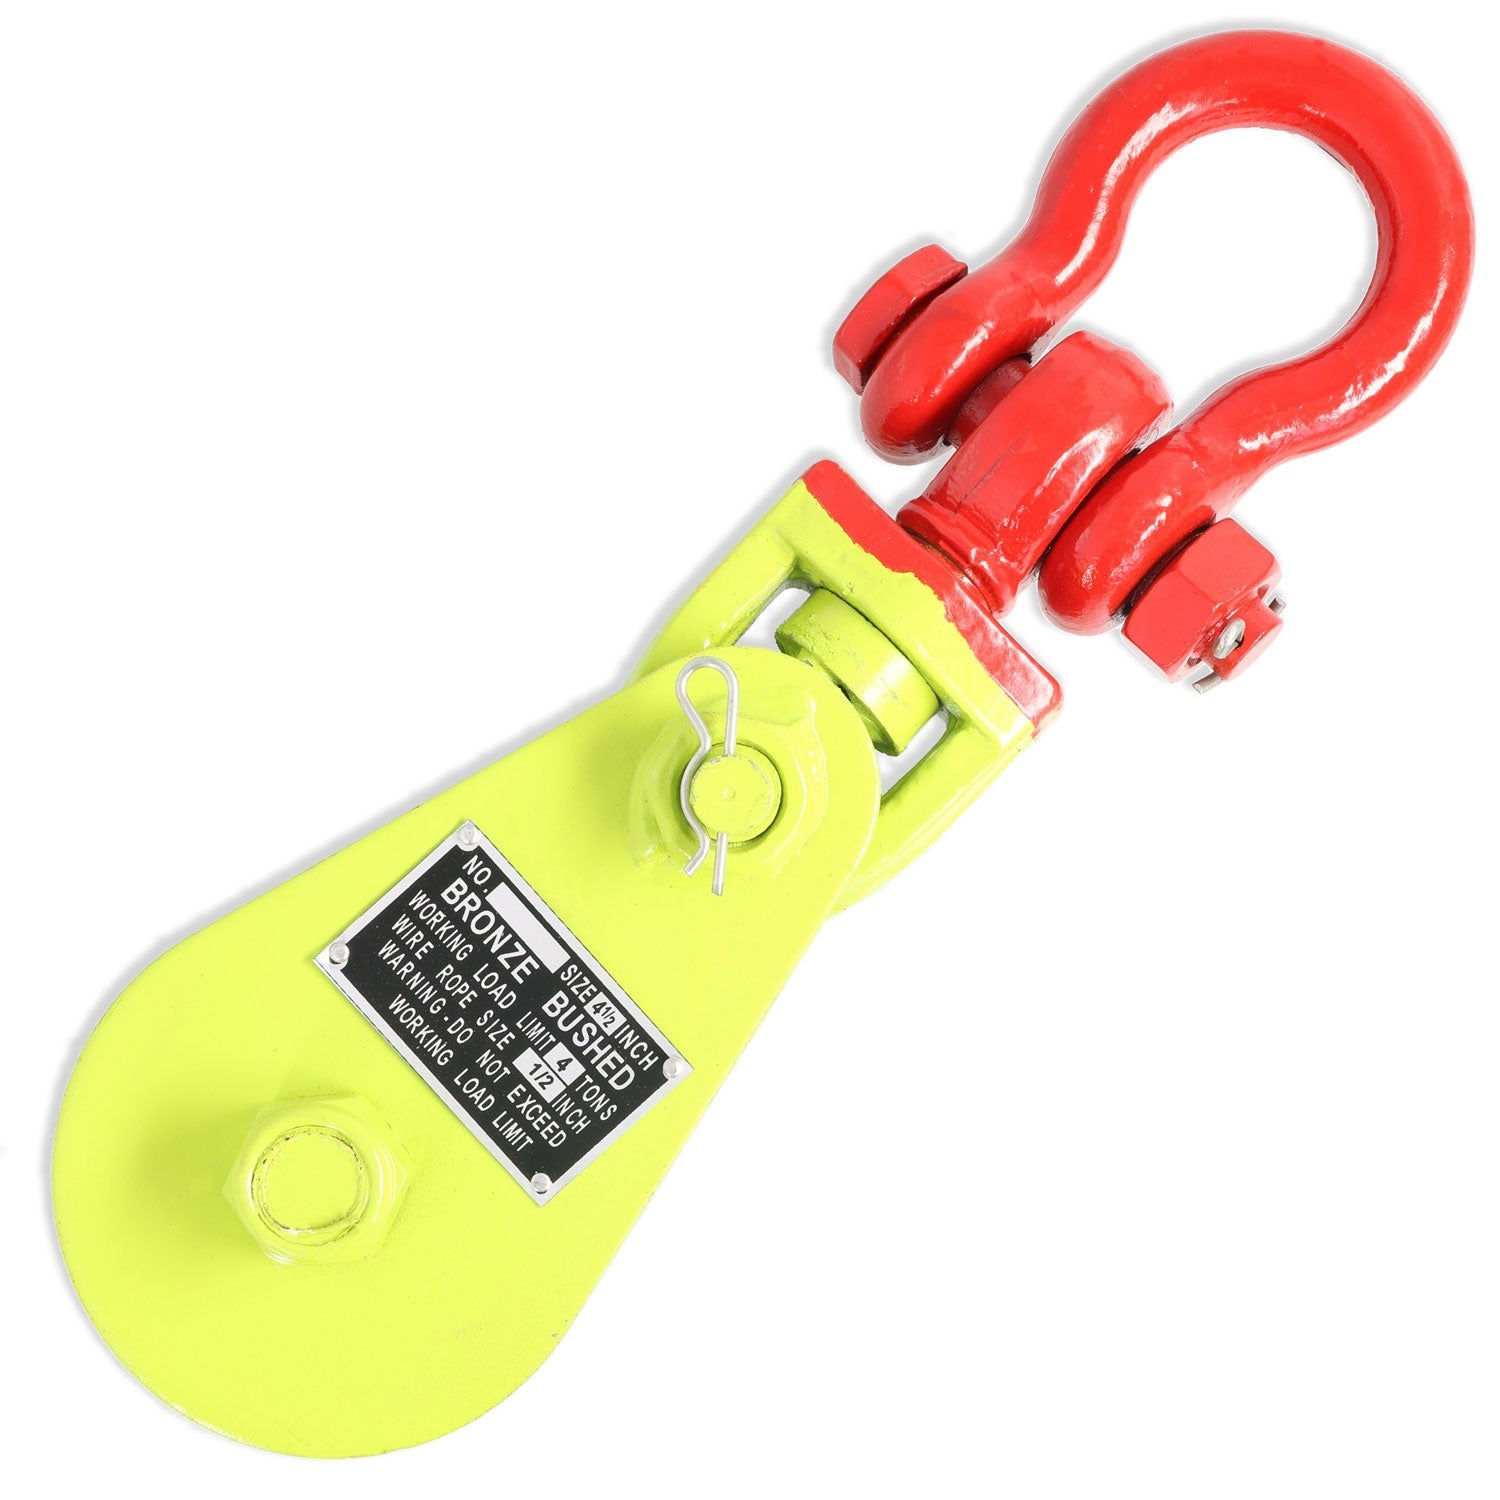 4 Ton 4-1/2" Snatch Block with Hook and Latch Tow Rigging Construktion 0900158 